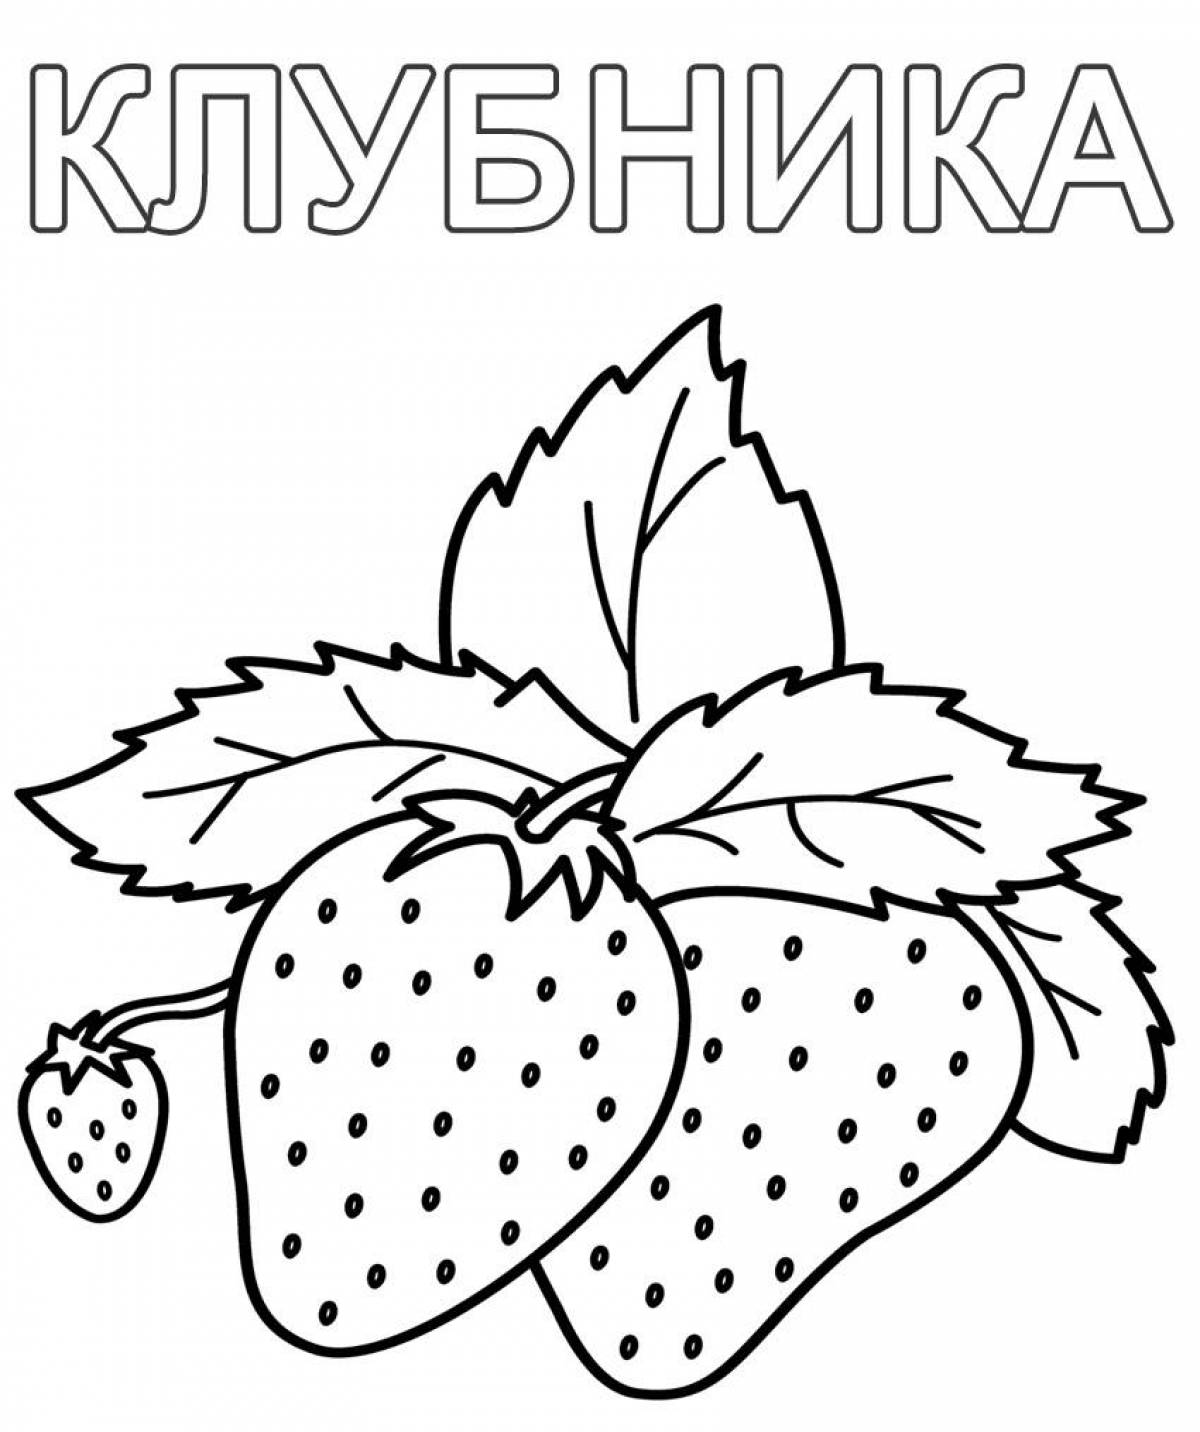 Adorable fruits and vegetables coloring book for kids